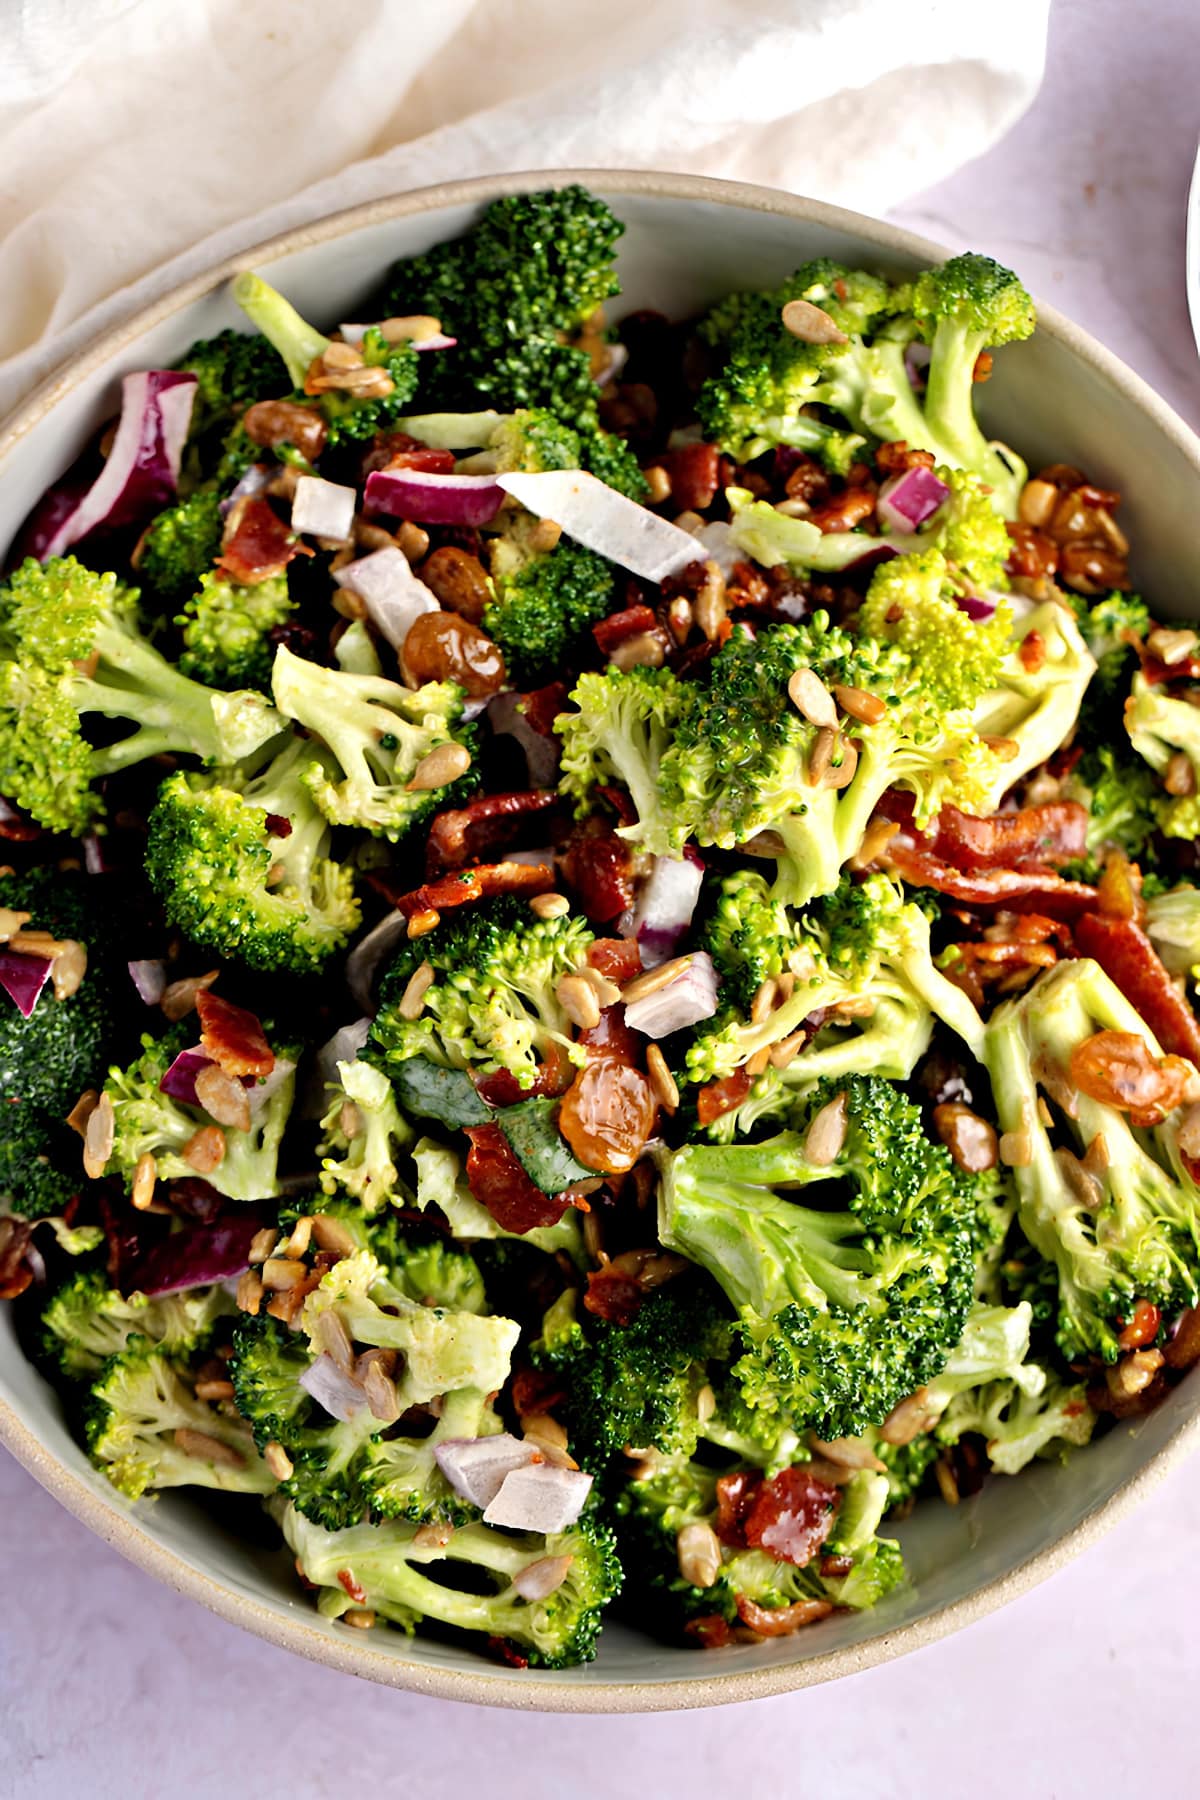 Homemade Broccoli Salad with Onions, Bacon and Nuts